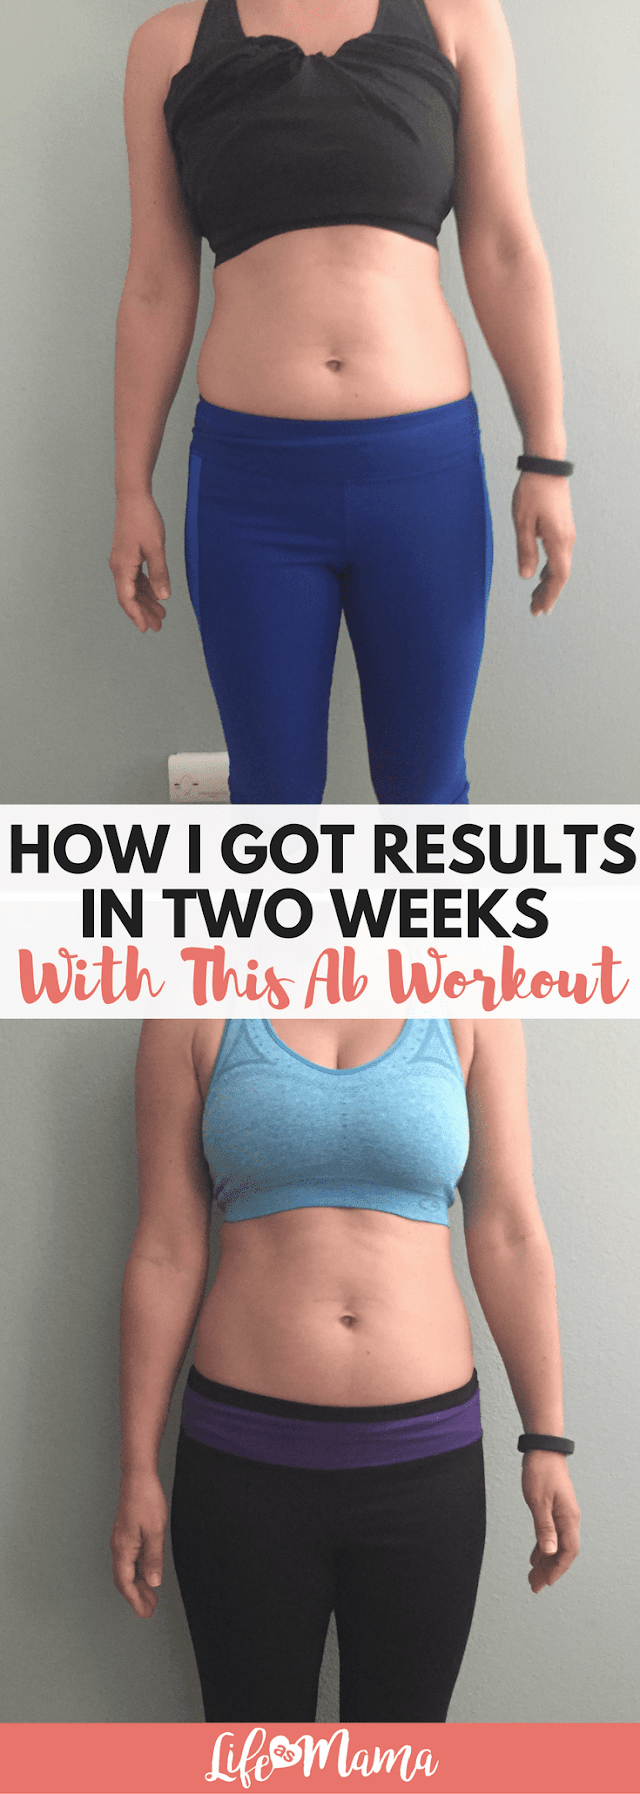 How I Got Results In Two Weeks With This Ab Workout